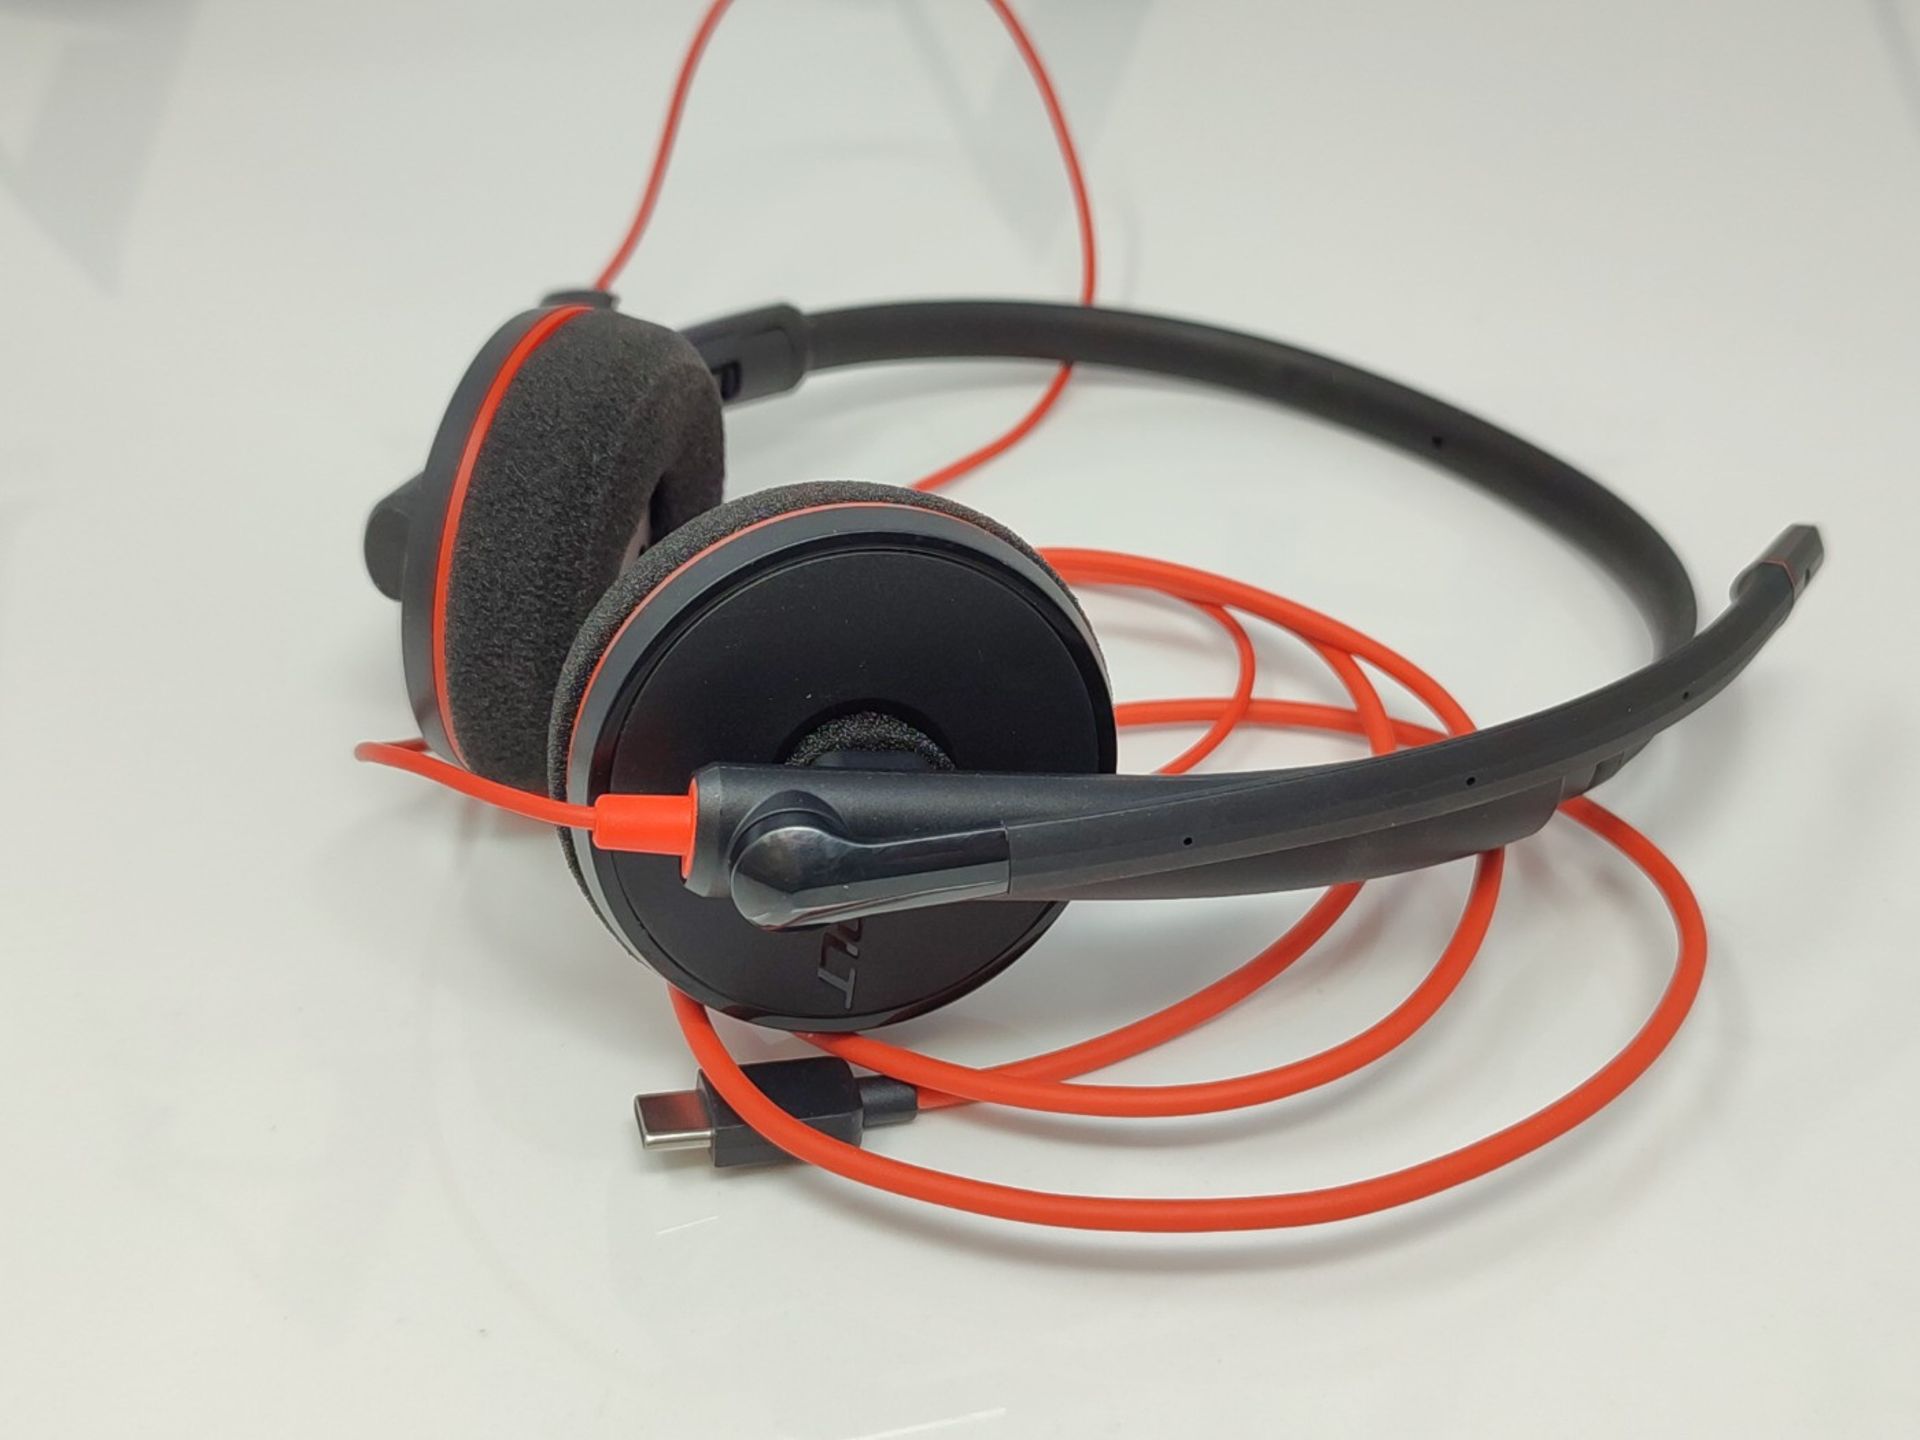 Plantronics - Blackwire 3220 - Wired Dual-Ear (Stereo) Headset with Boom Mic - USB-C t - Image 2 of 3